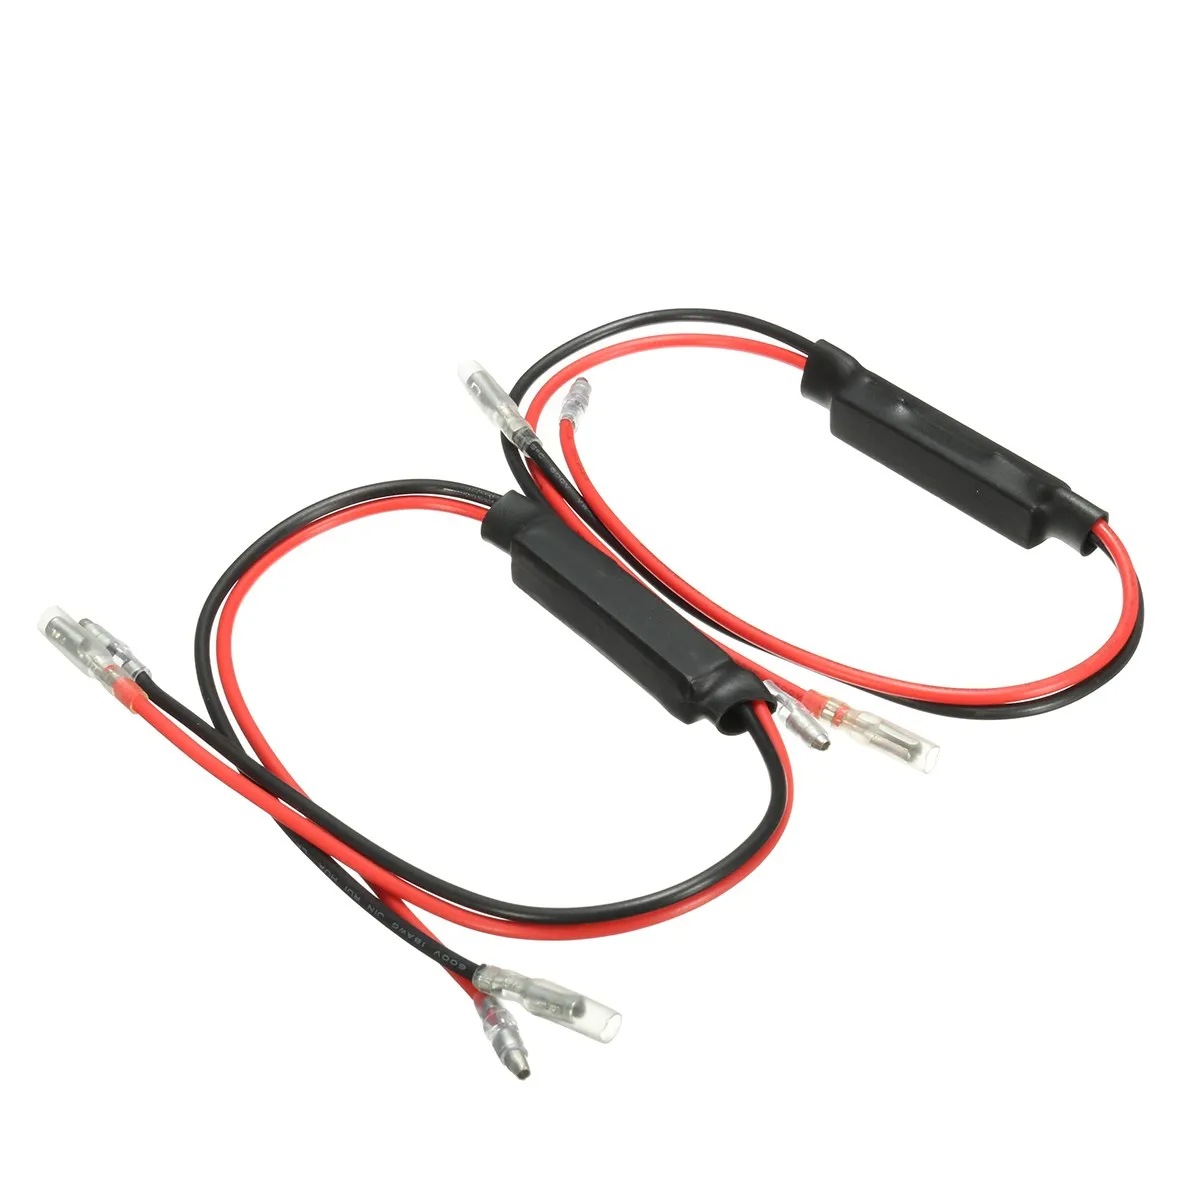 Load Resistors For Use With LED Motorcycle Indicators Pair Slows Flash Rate Down 